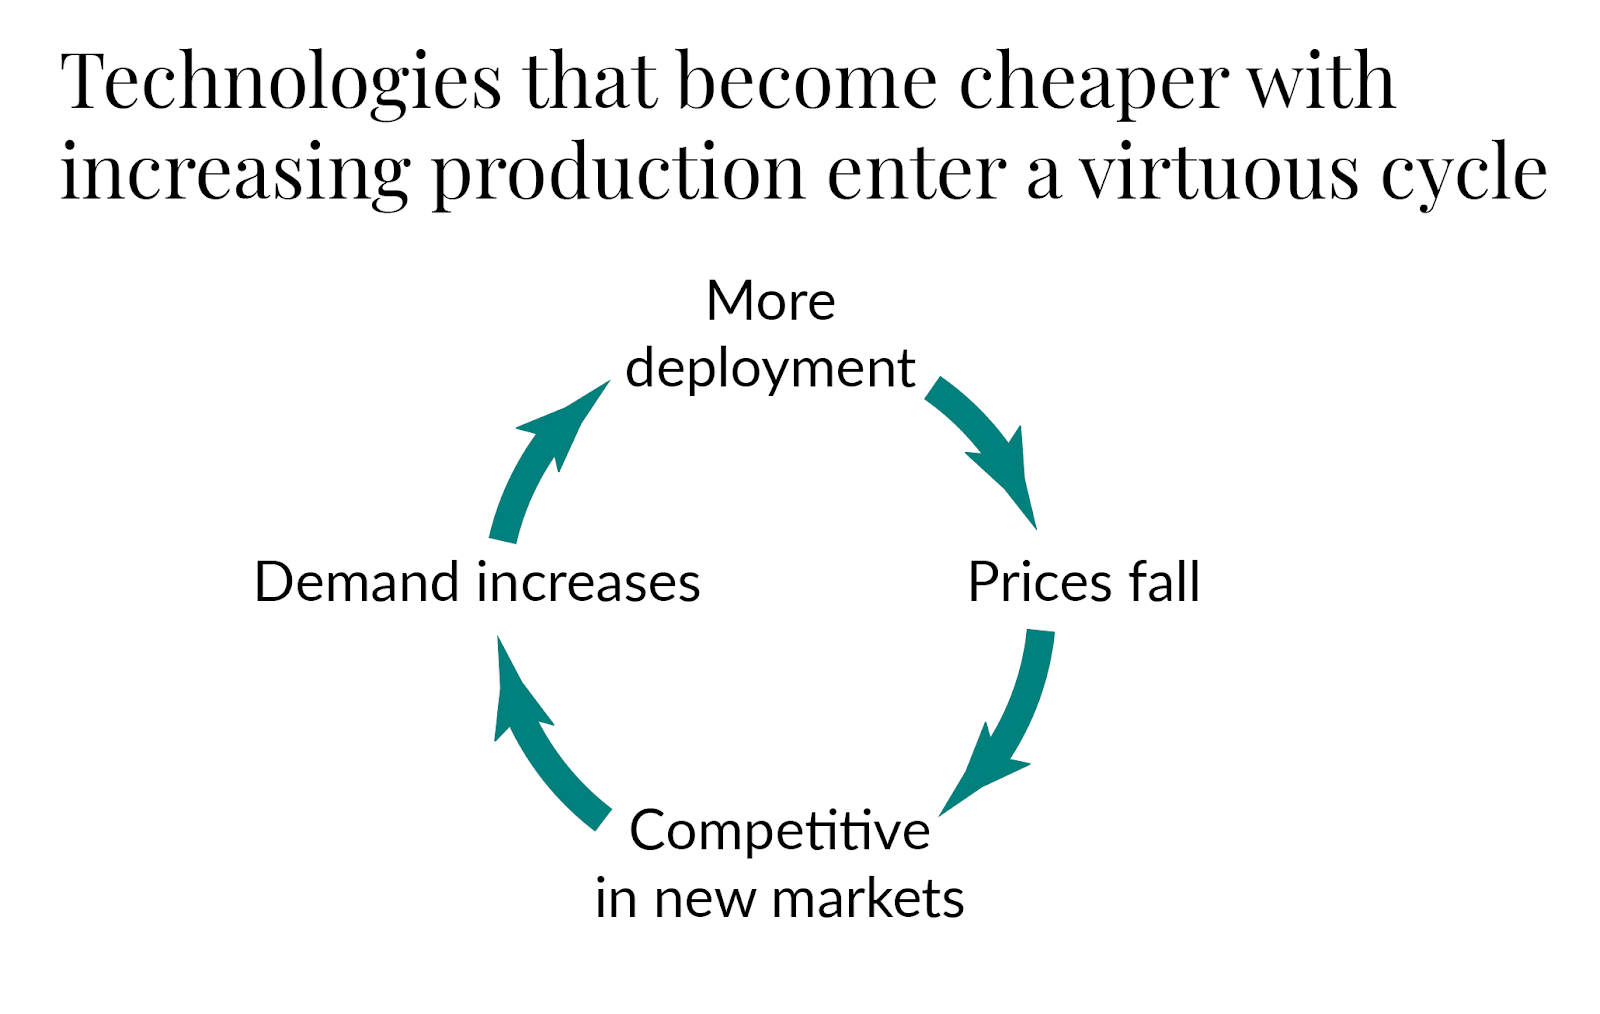 Circle showing a cycle of deploying more of a technology causes its prices to fall, which increases demand, and more is deployed.